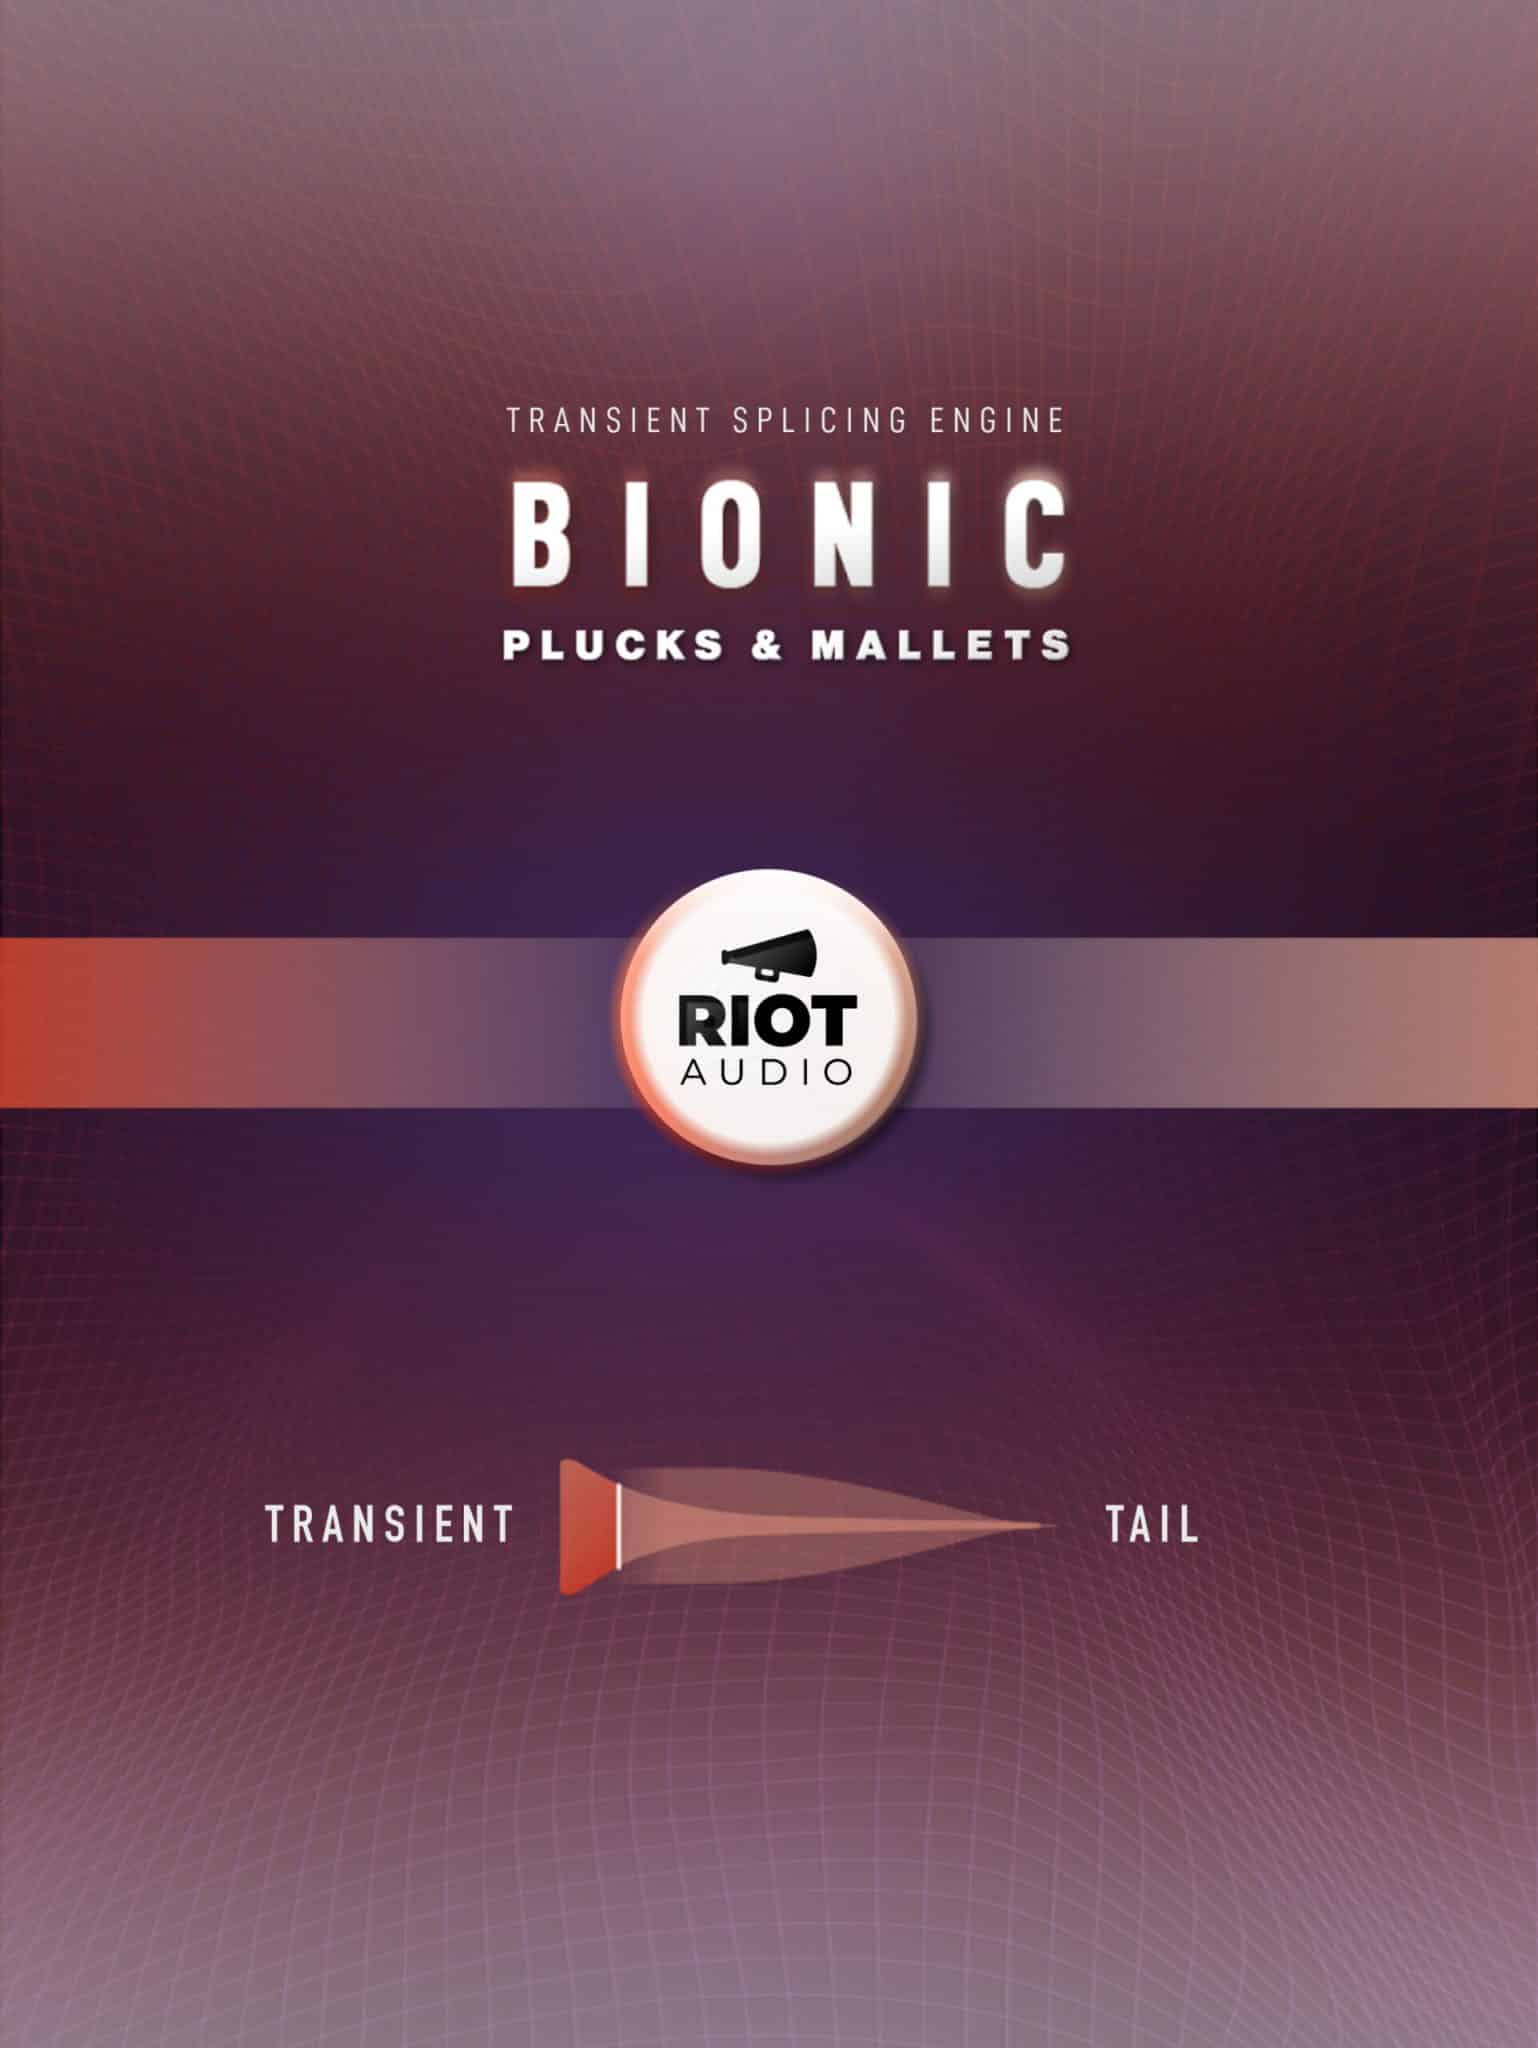 60% off “Bionic Plucks & Mallets” by Riot Audio